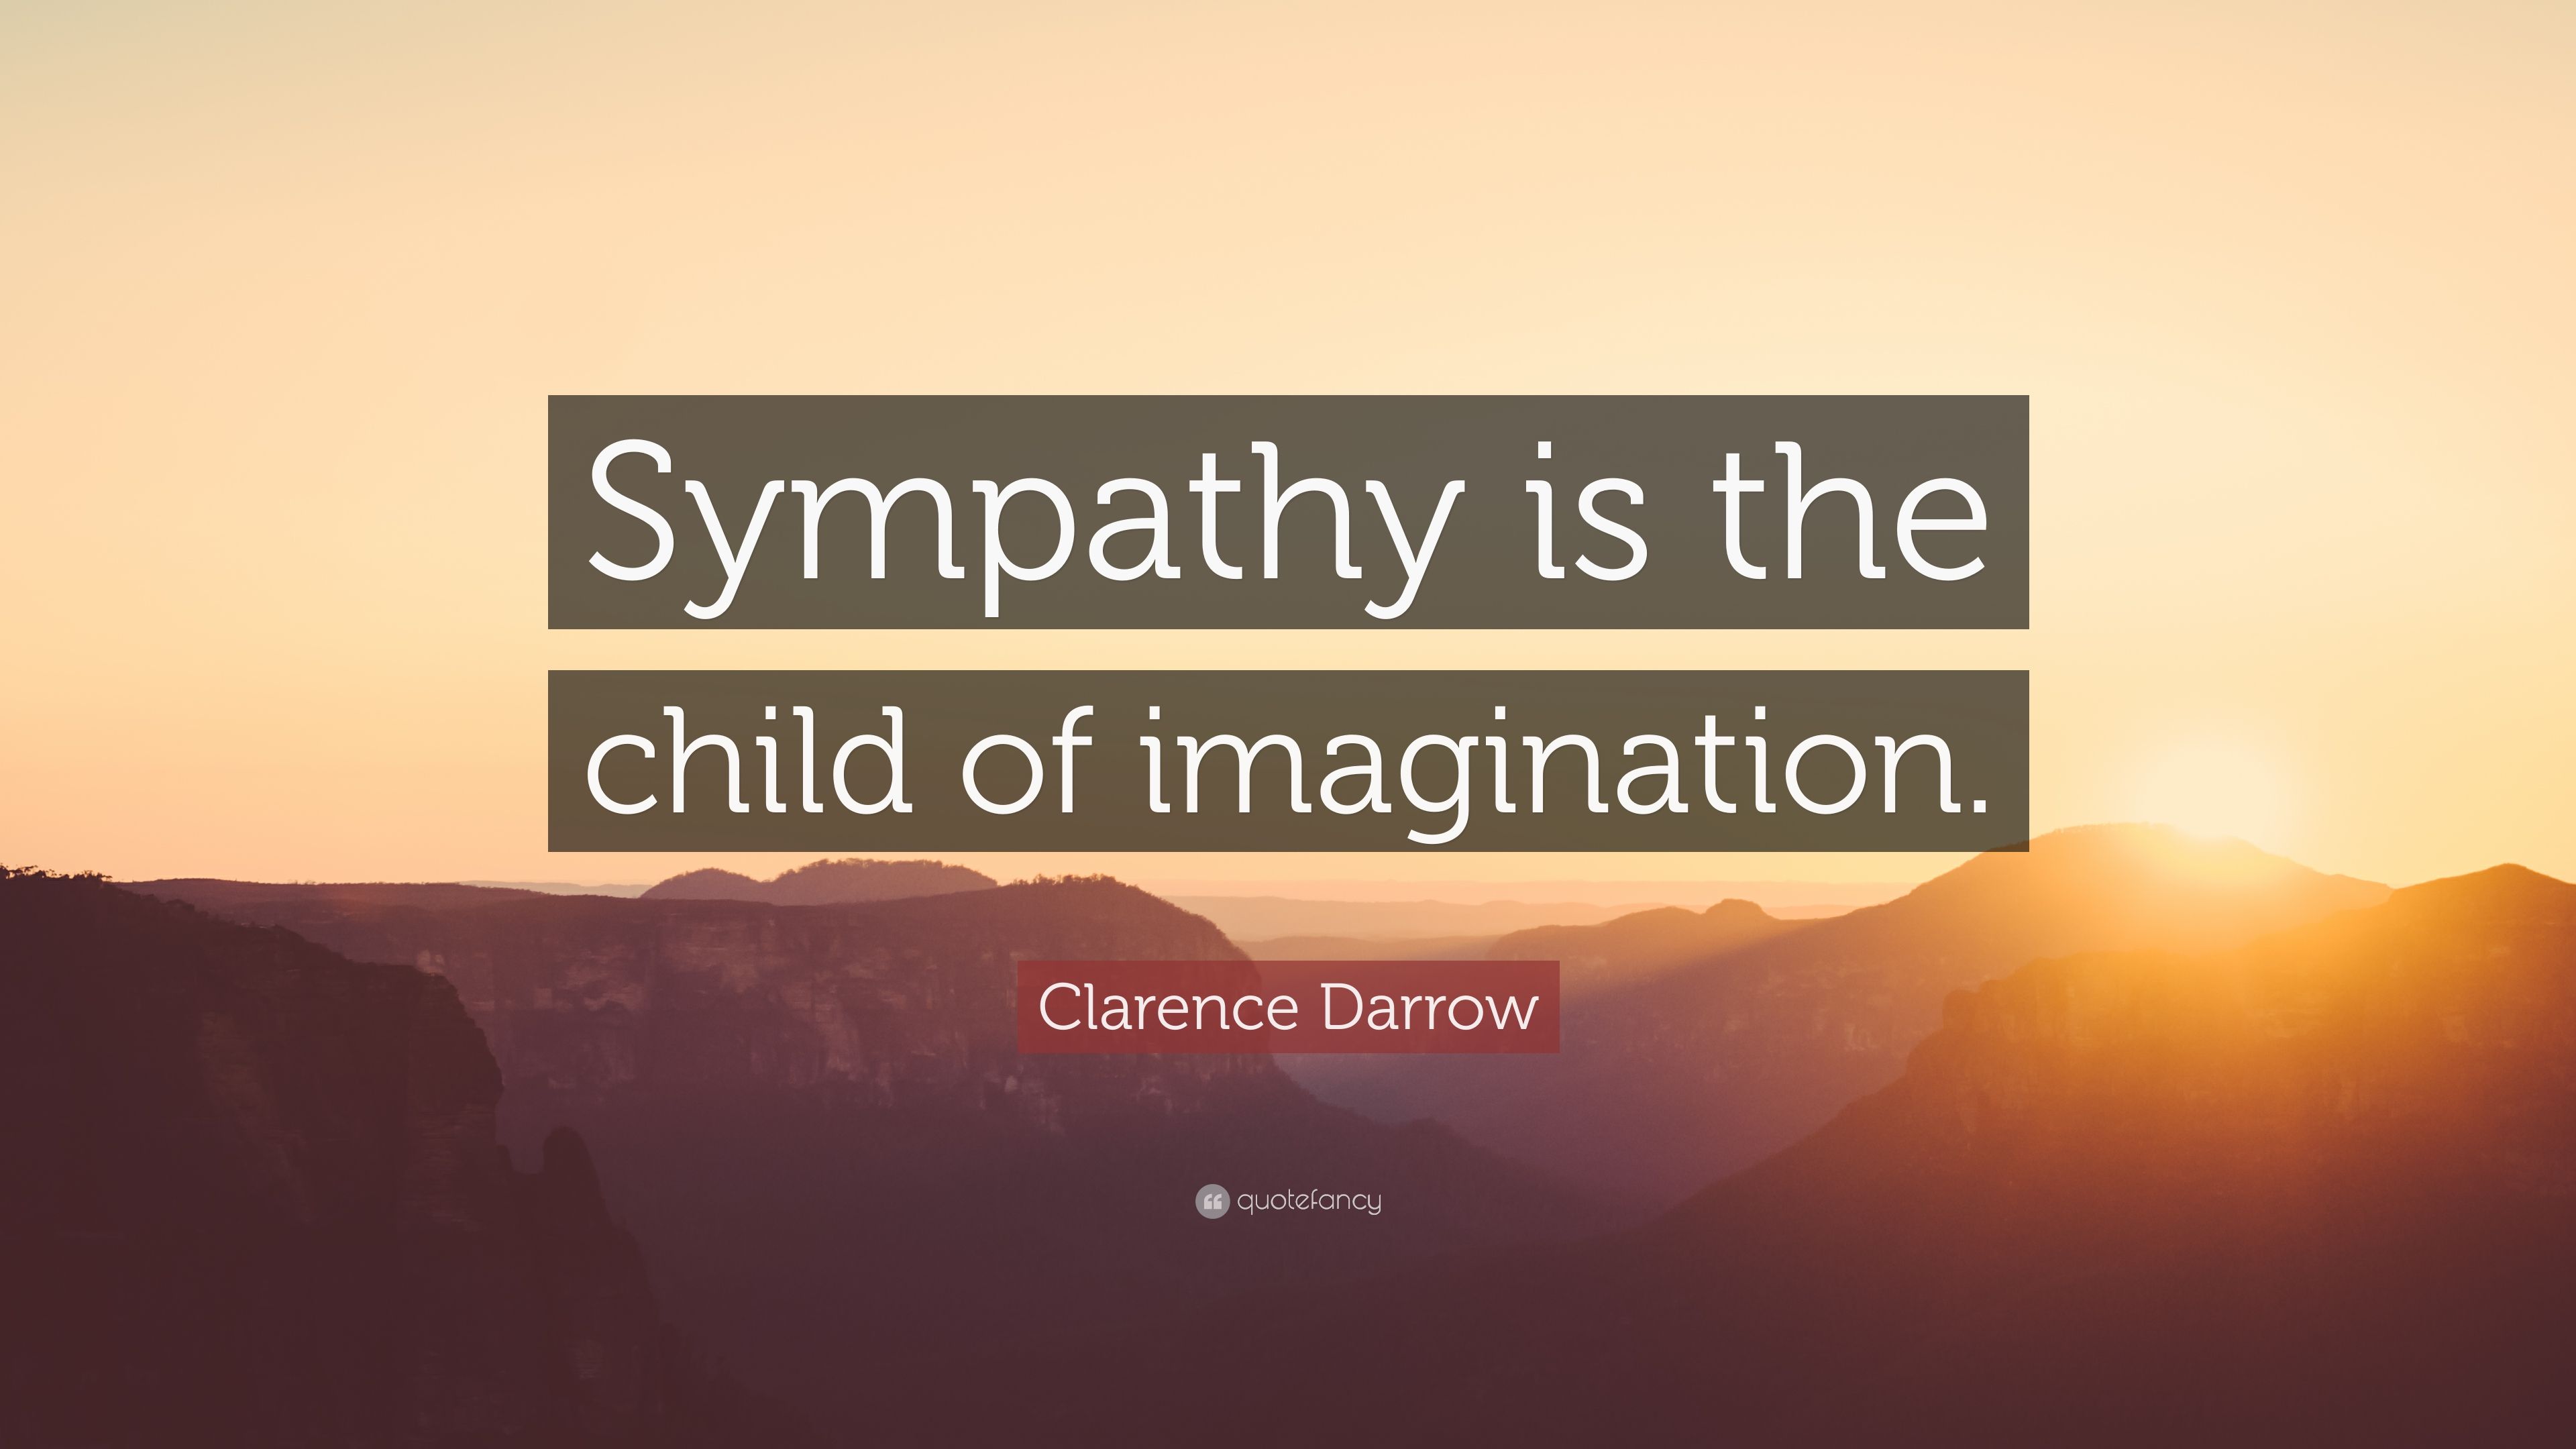 Clarence Darrow Quote: “Sympathy is the child of imagination.” (7 wallpaper)